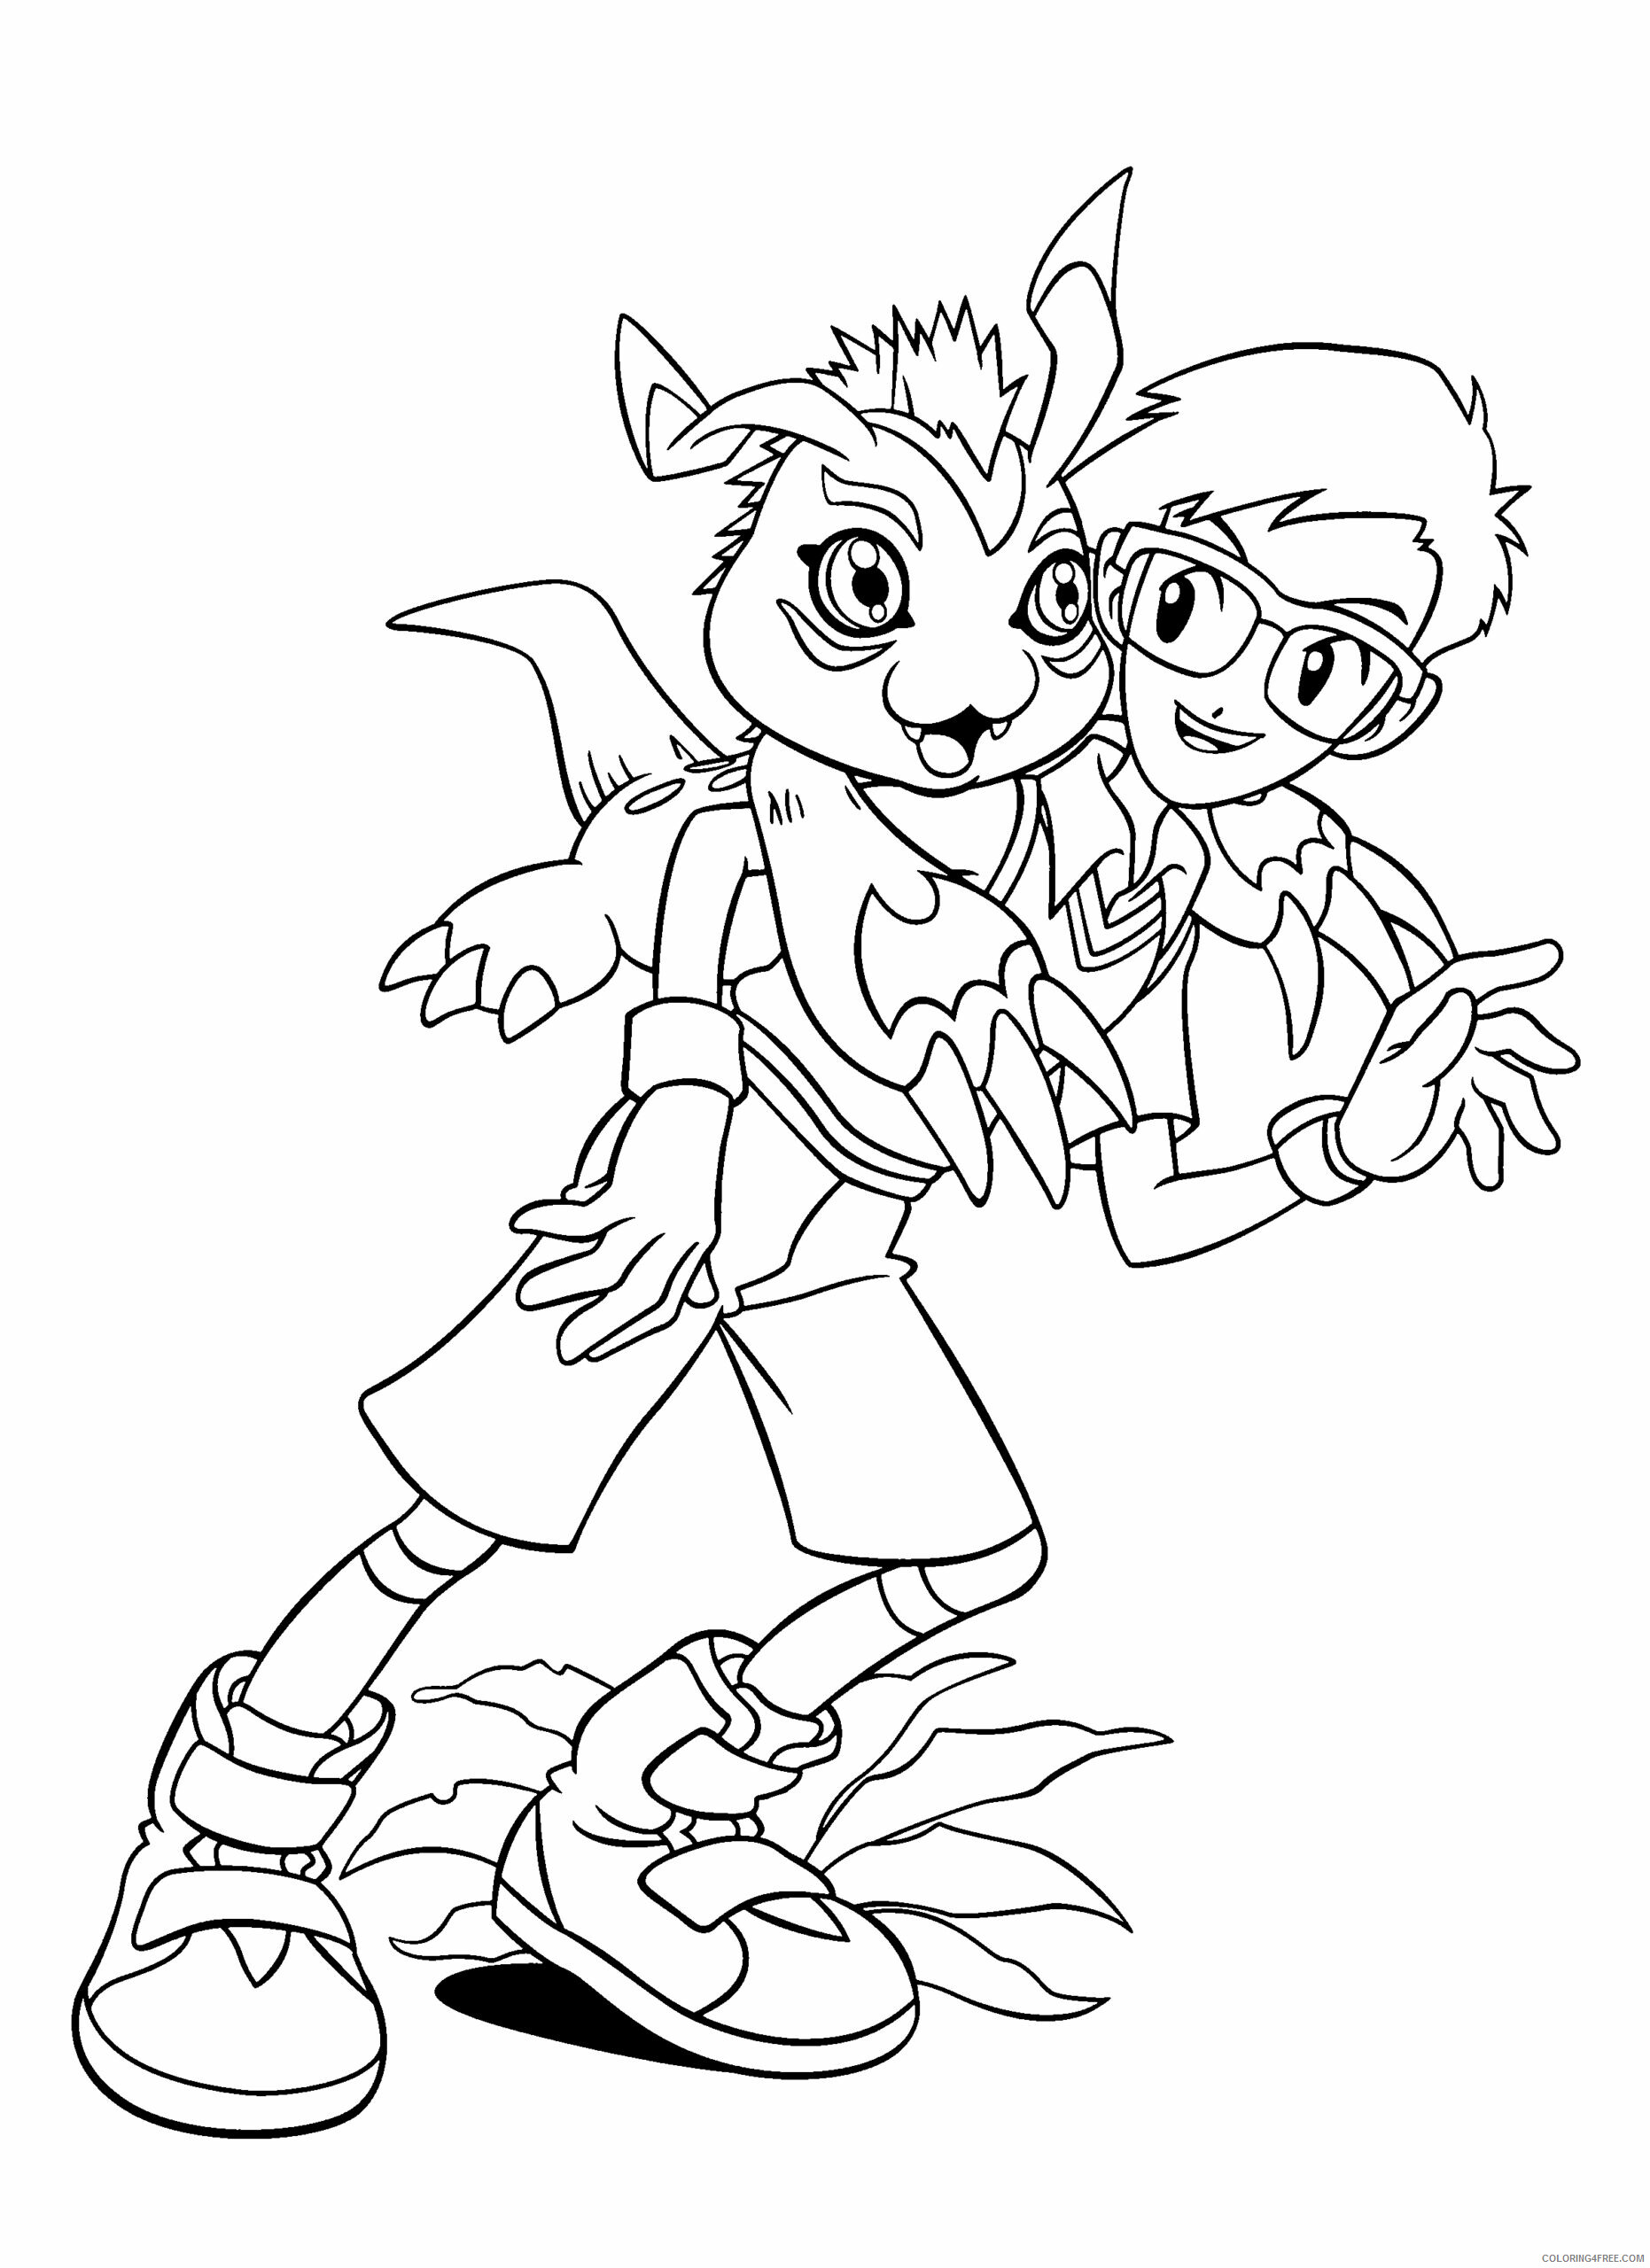 Digimon Printable Coloring Pages Anime digimon U4dx5 2021 0189 Coloring4free